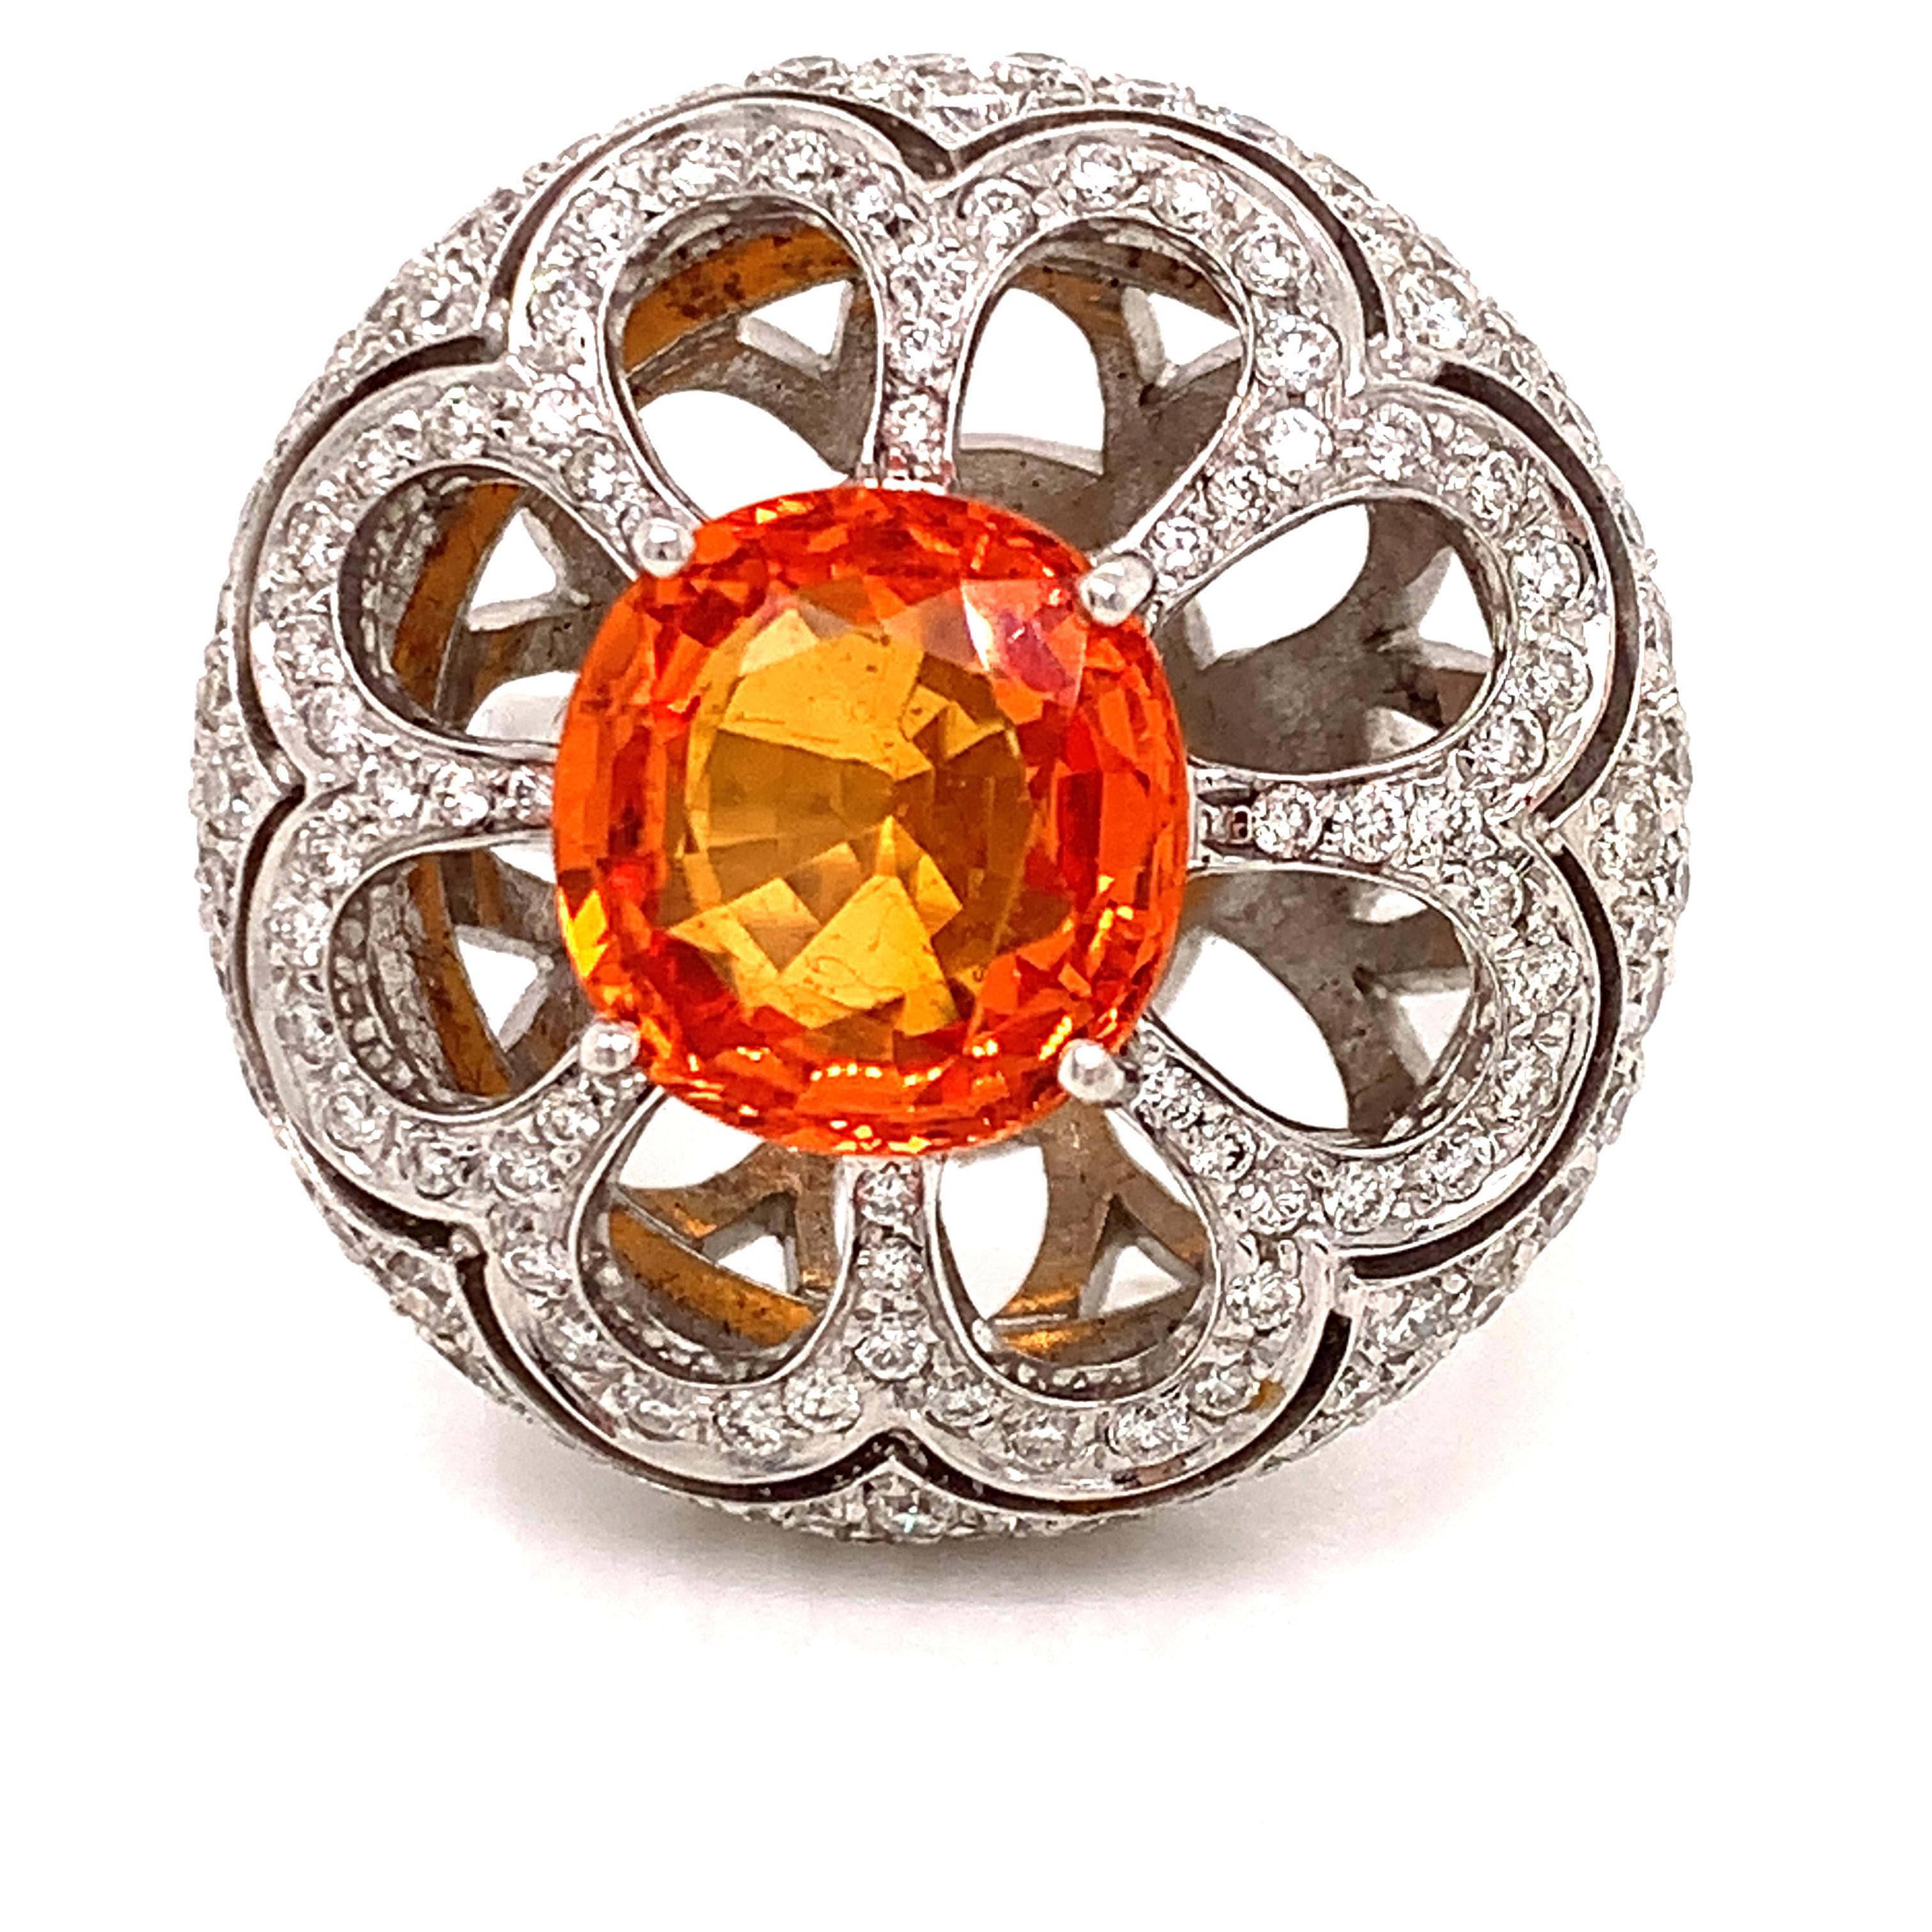 Be the toast of the town in this orange sapphire cocktail ring from iconic Italian brand Zydo.   A stunning statement piece with a 5.10 carat vibrant orange sapphire in the center of 2.45 cttw round diamonds.  This unique ring is a piece of art, set